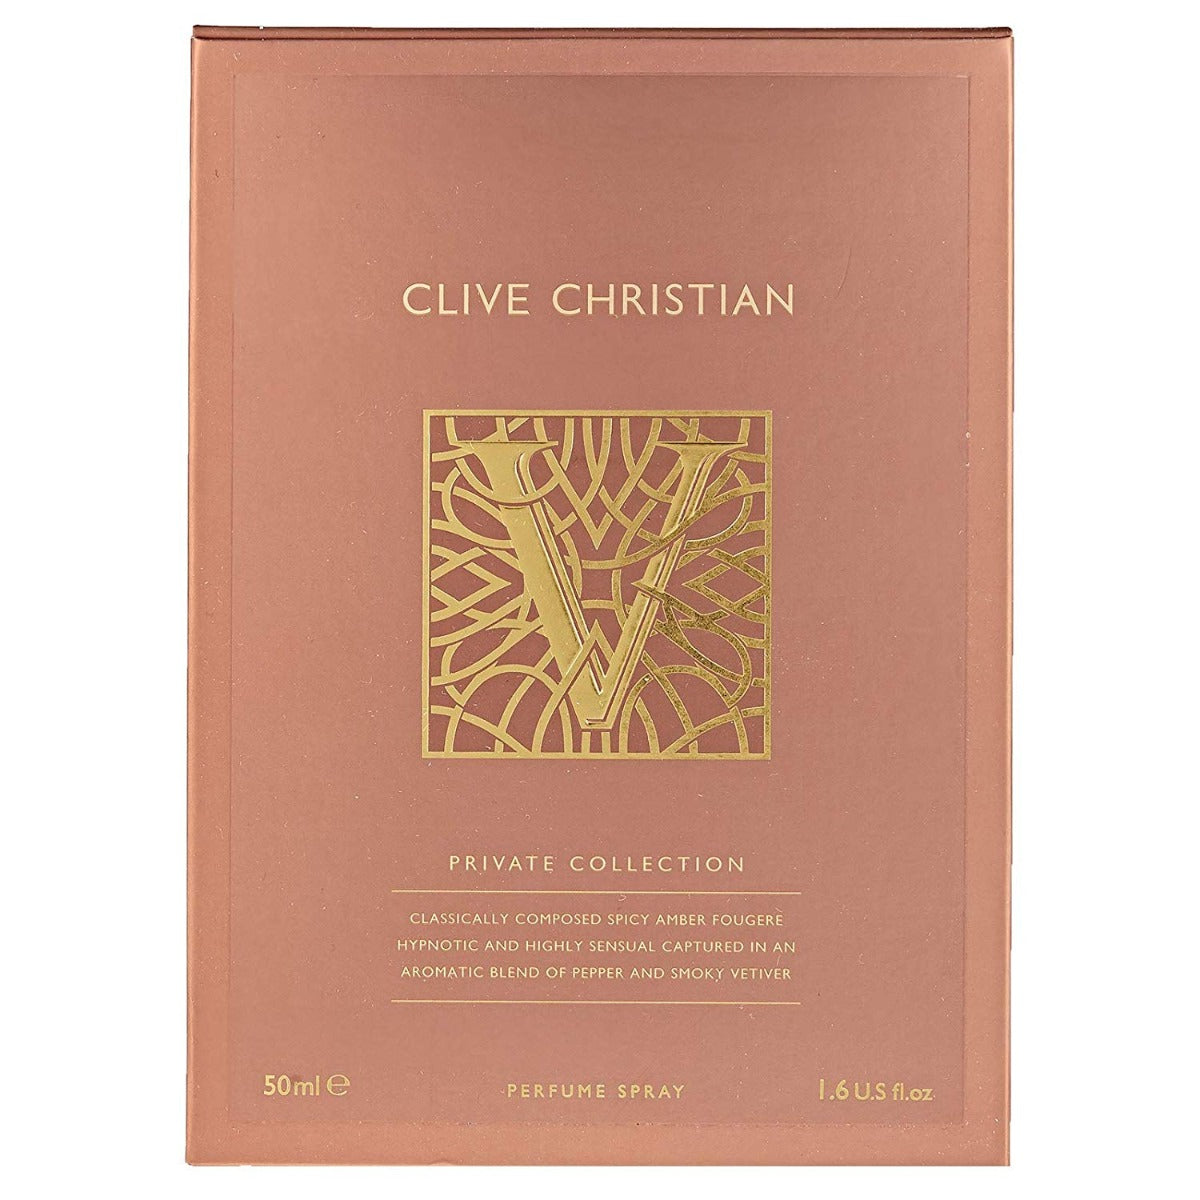 CLIVE CHRISTIAN V AMBER FOUGERE WITH SMOKY VETIVER PERFUME FOR MEN 50 ml - samawa perfumes 